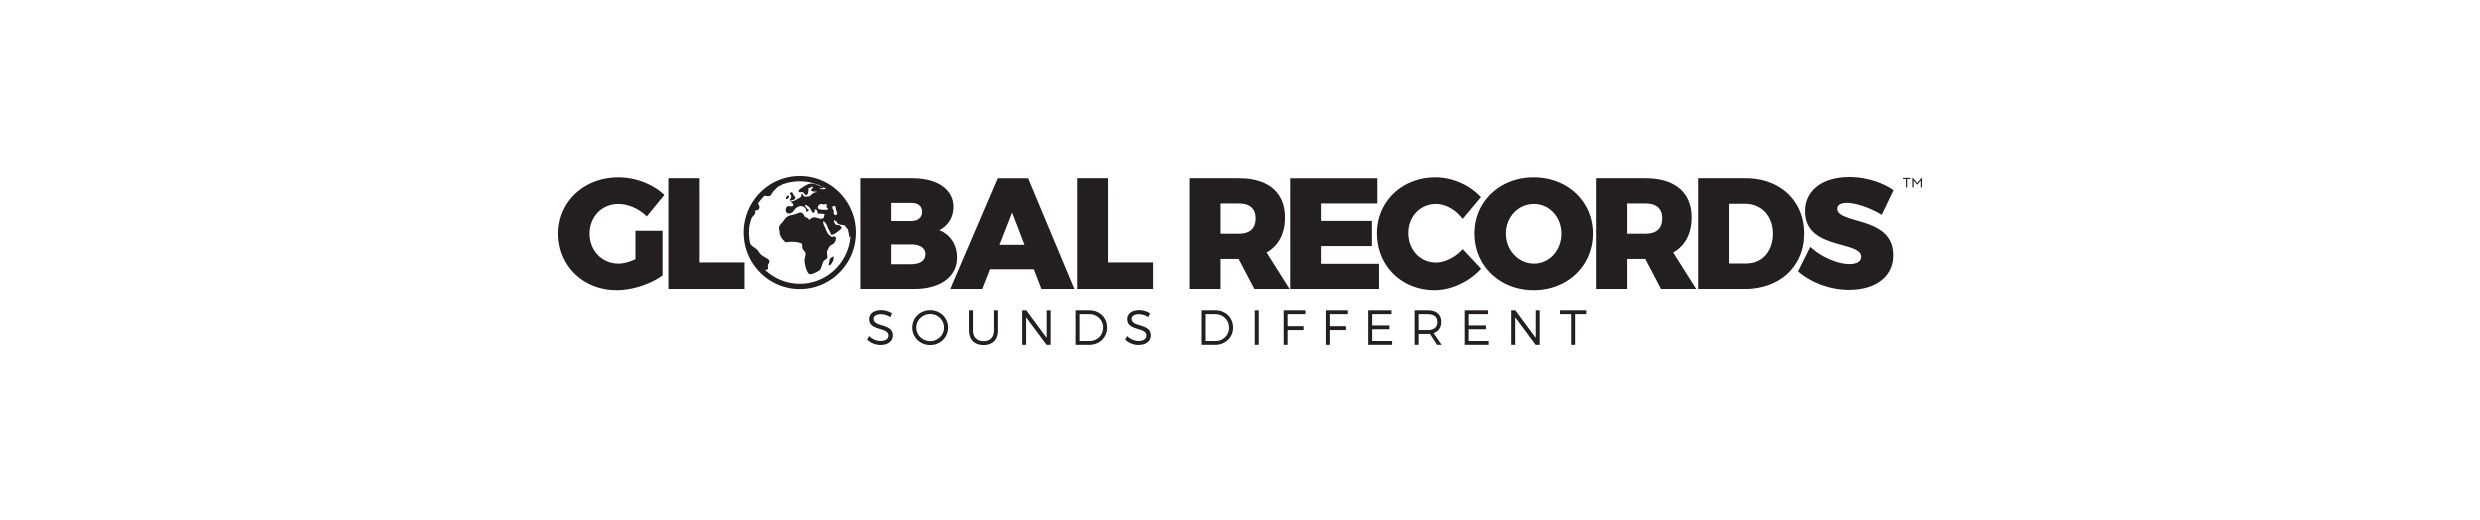 Stream GLOBAL RECORDS music | Listen to songs, albums, playlists for free  on SoundCloud